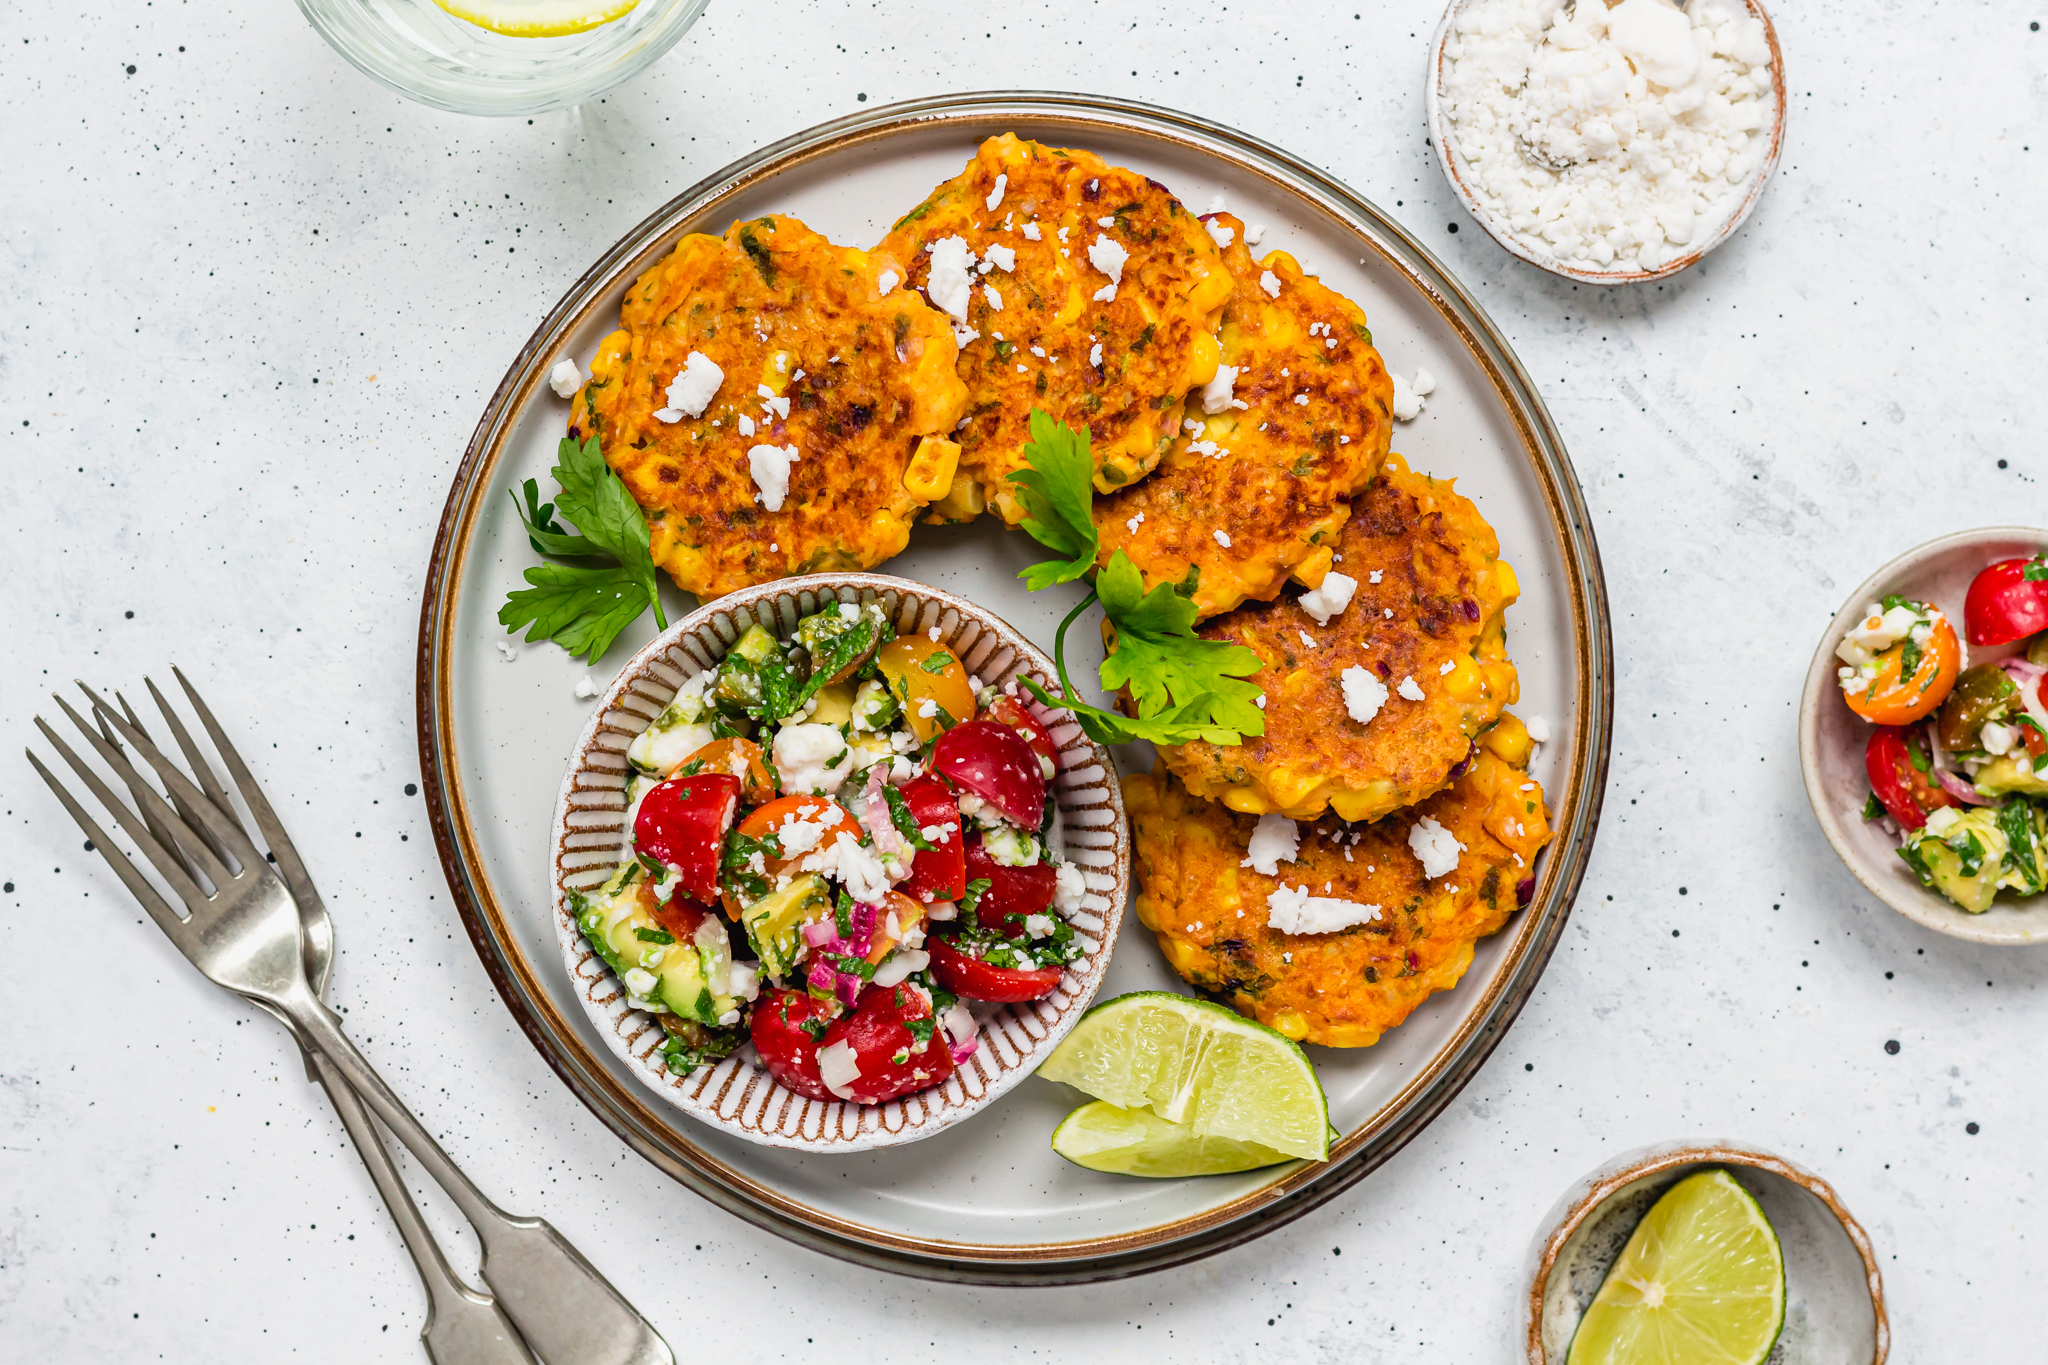 Sweetcorn Fritters with Avocado, Tomato and “Feta” Salad Sweetcorn Fritters with Avocado, Tomato and “Feta” Salad